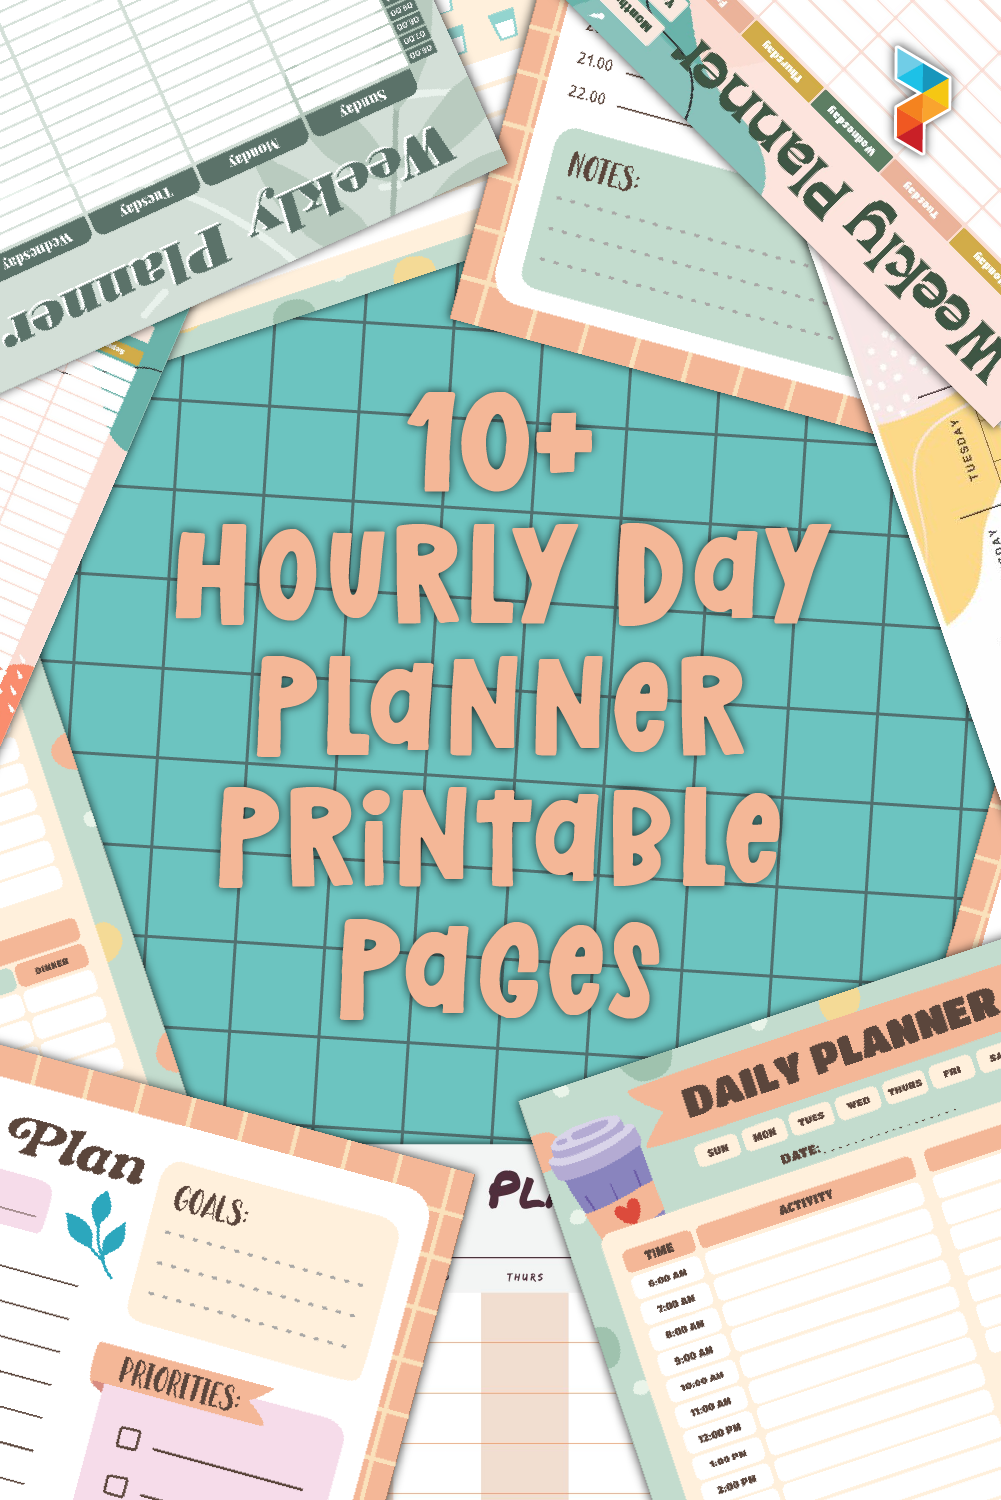 Hourly Day Planner Pages